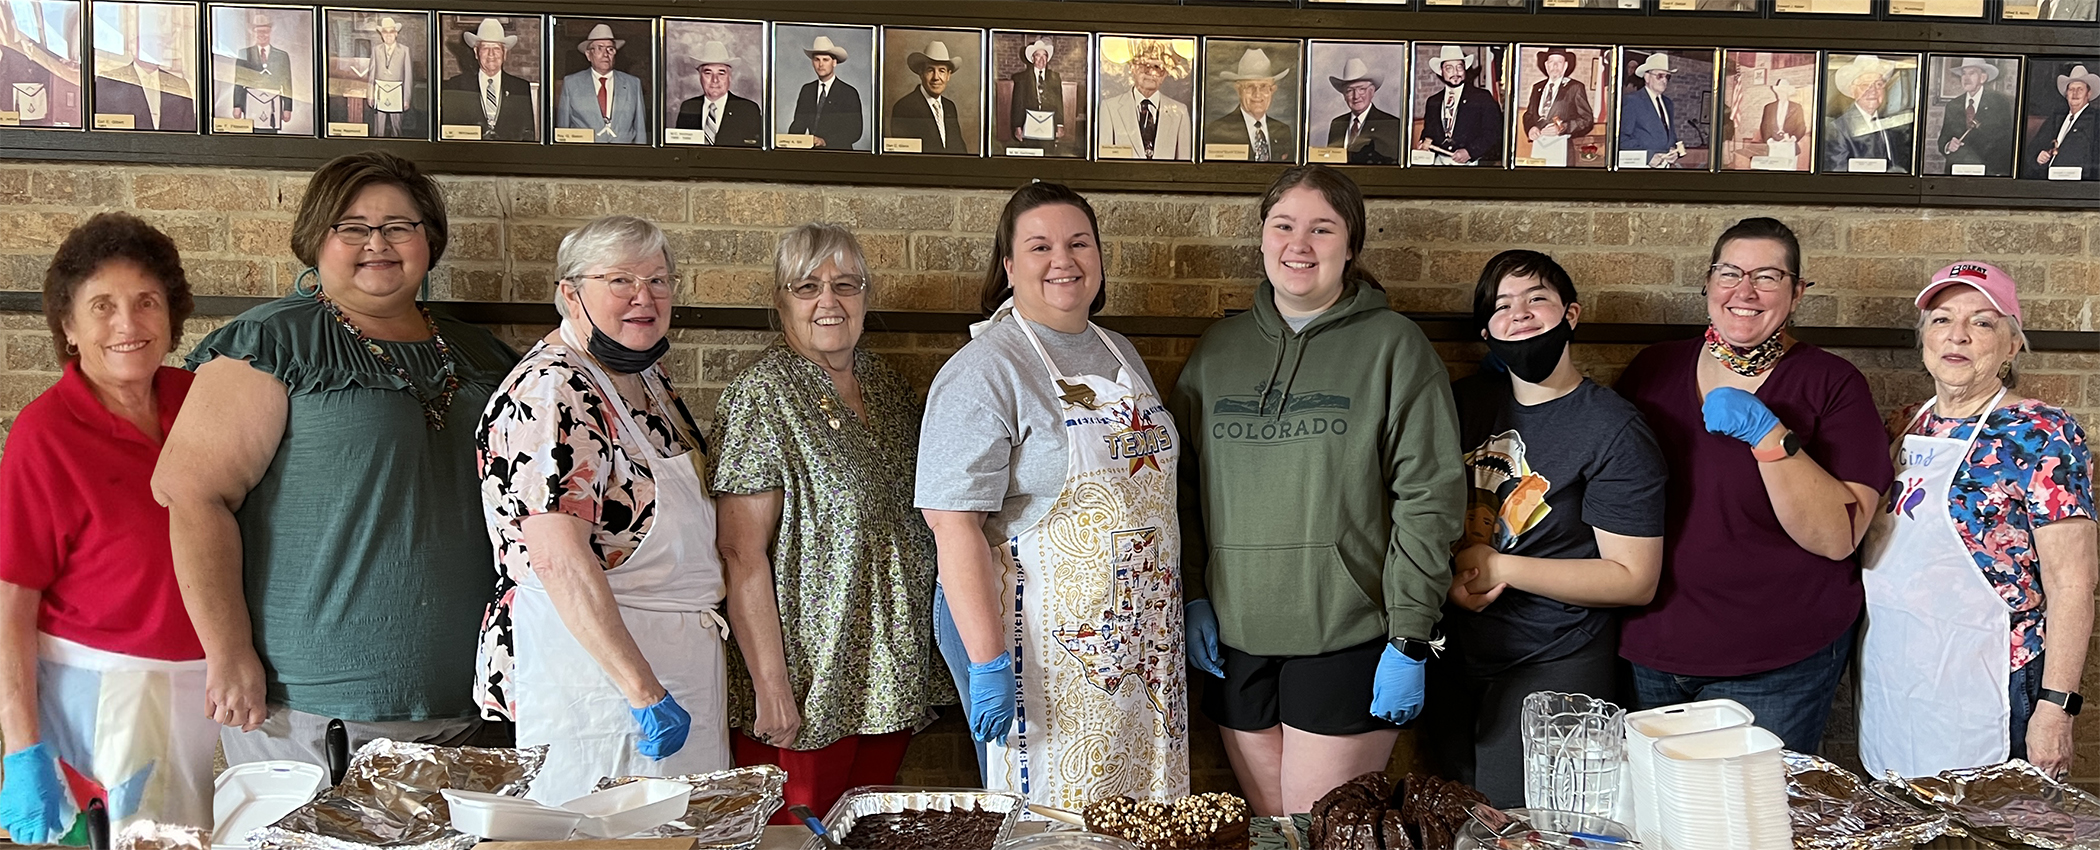 Boerne Chapter 200 OES Serves Cakes for Kendall Lodge 897 for Fundraiser - along with family and Friends